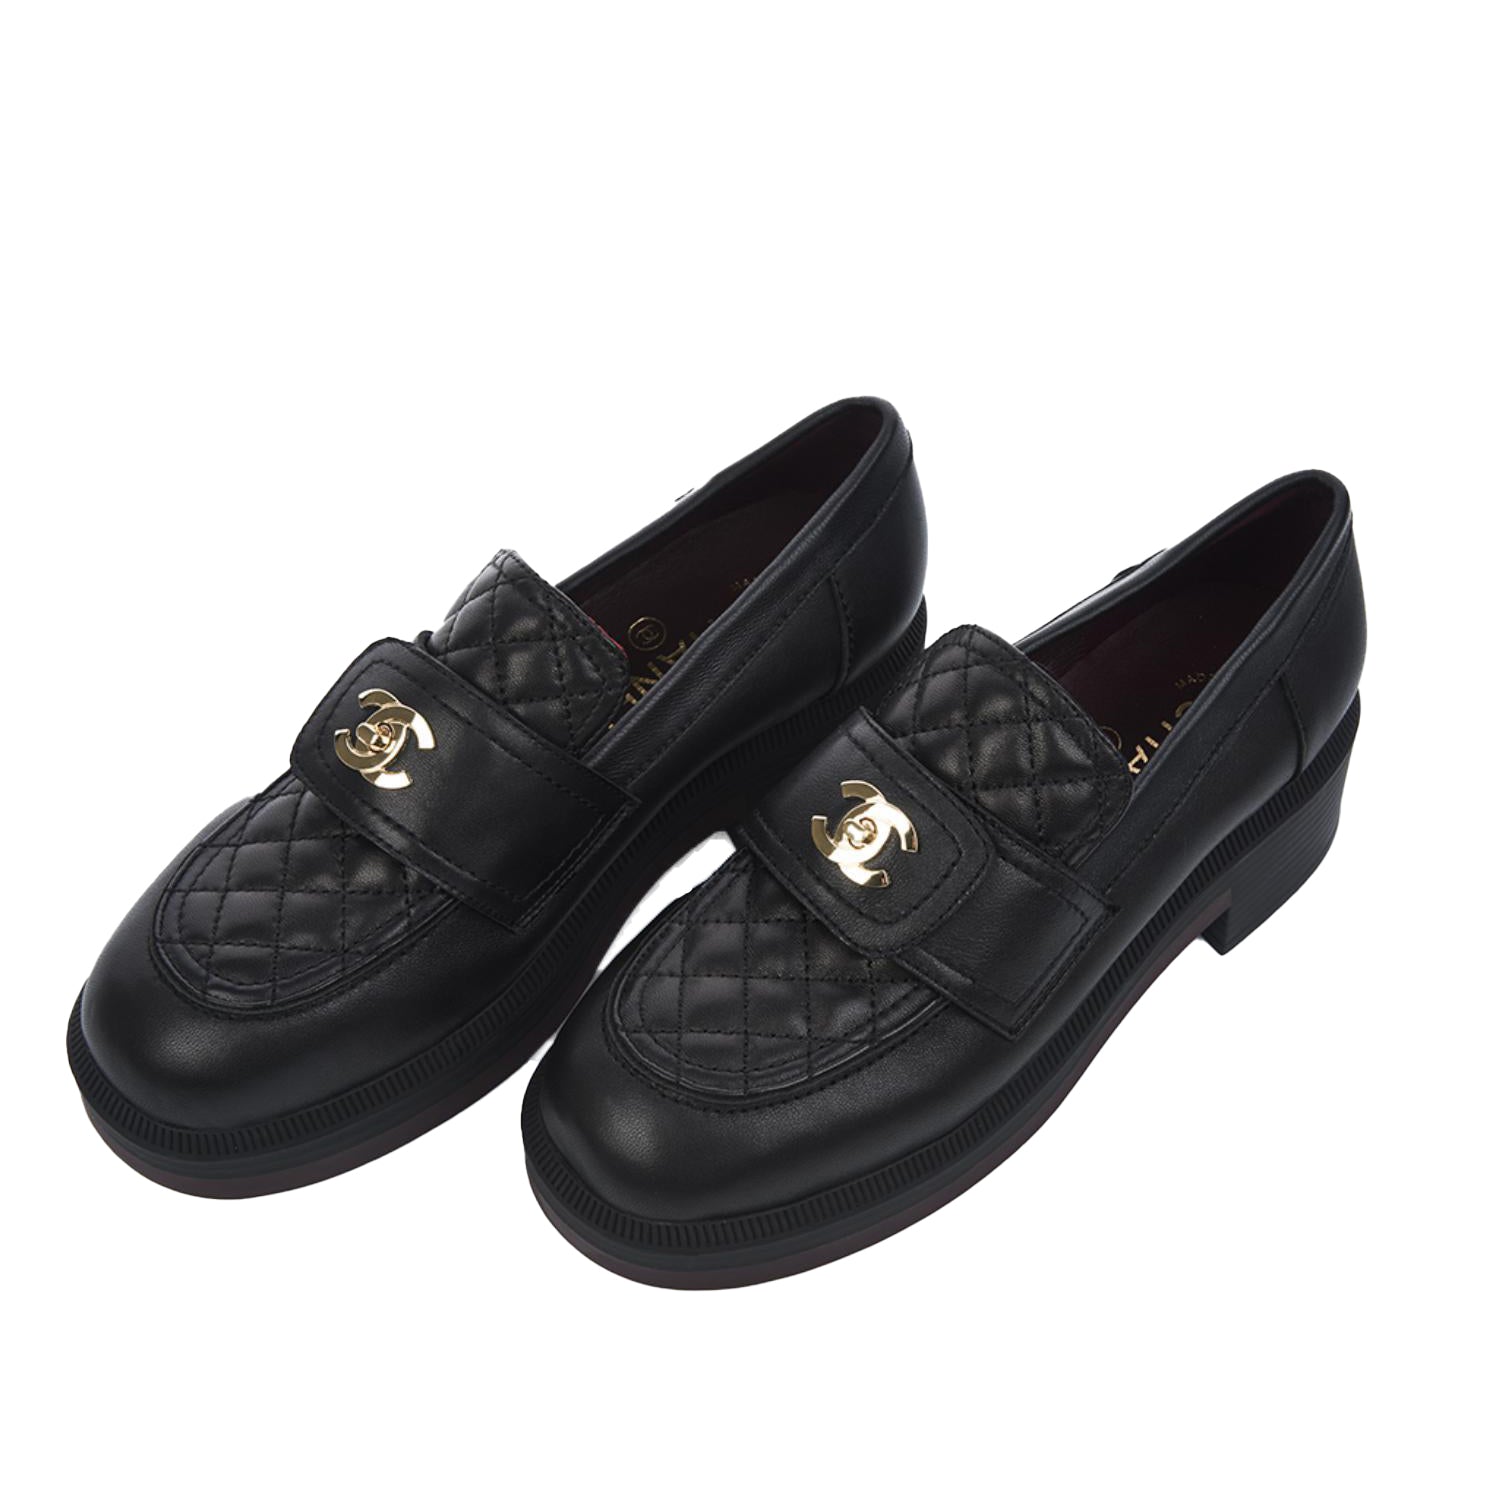 Chanel Lambskin Quilted CC Turnlock Loafers Black - Size 38 EU / 8